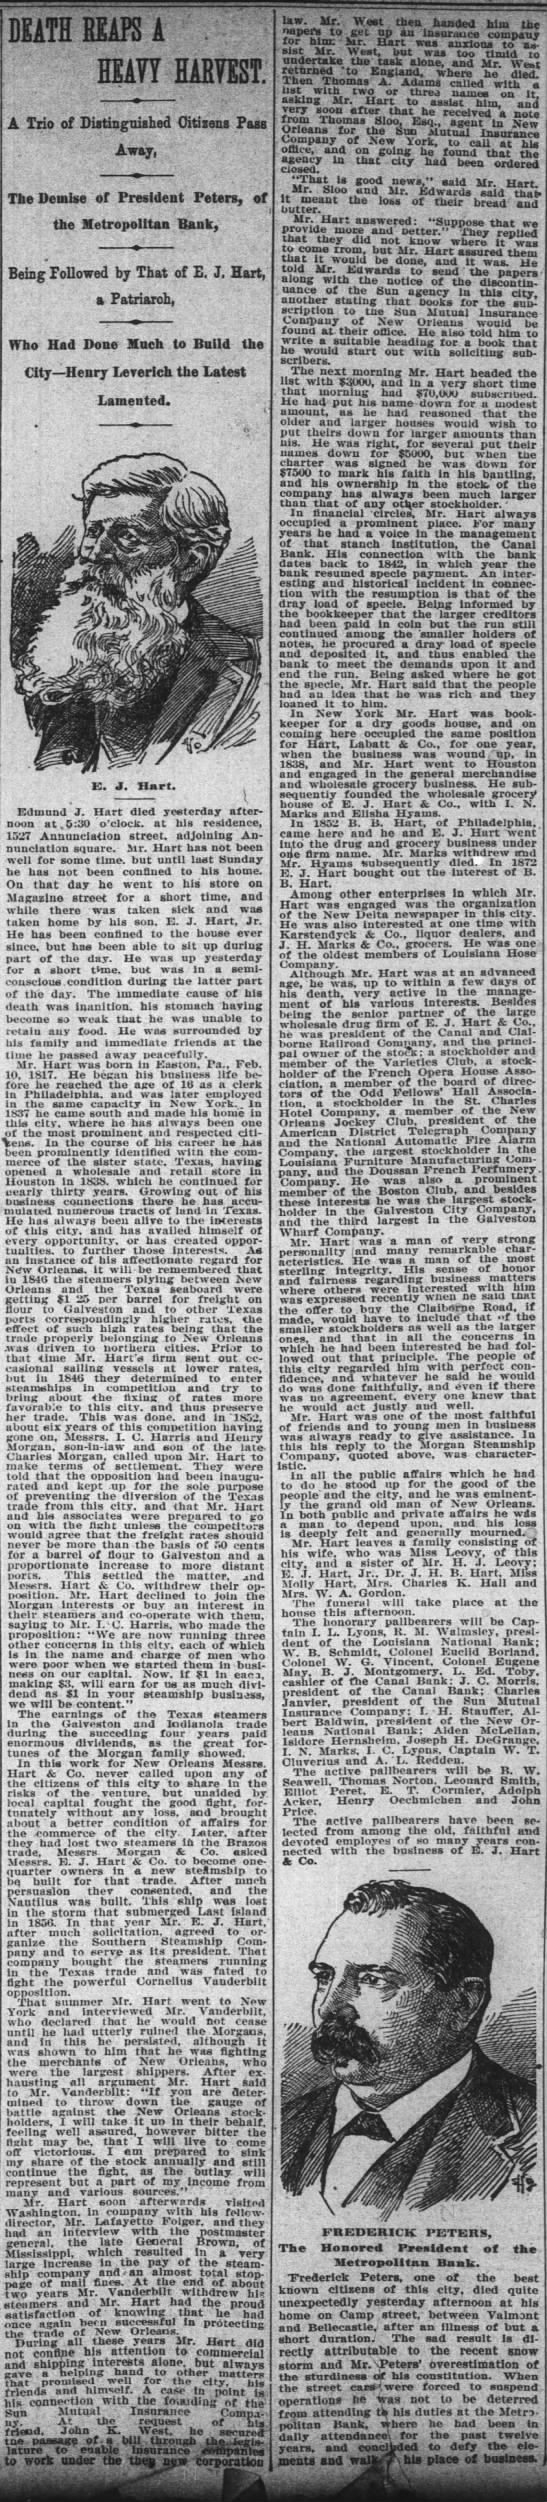 The Times Picayune 9 Mar 1895 - 